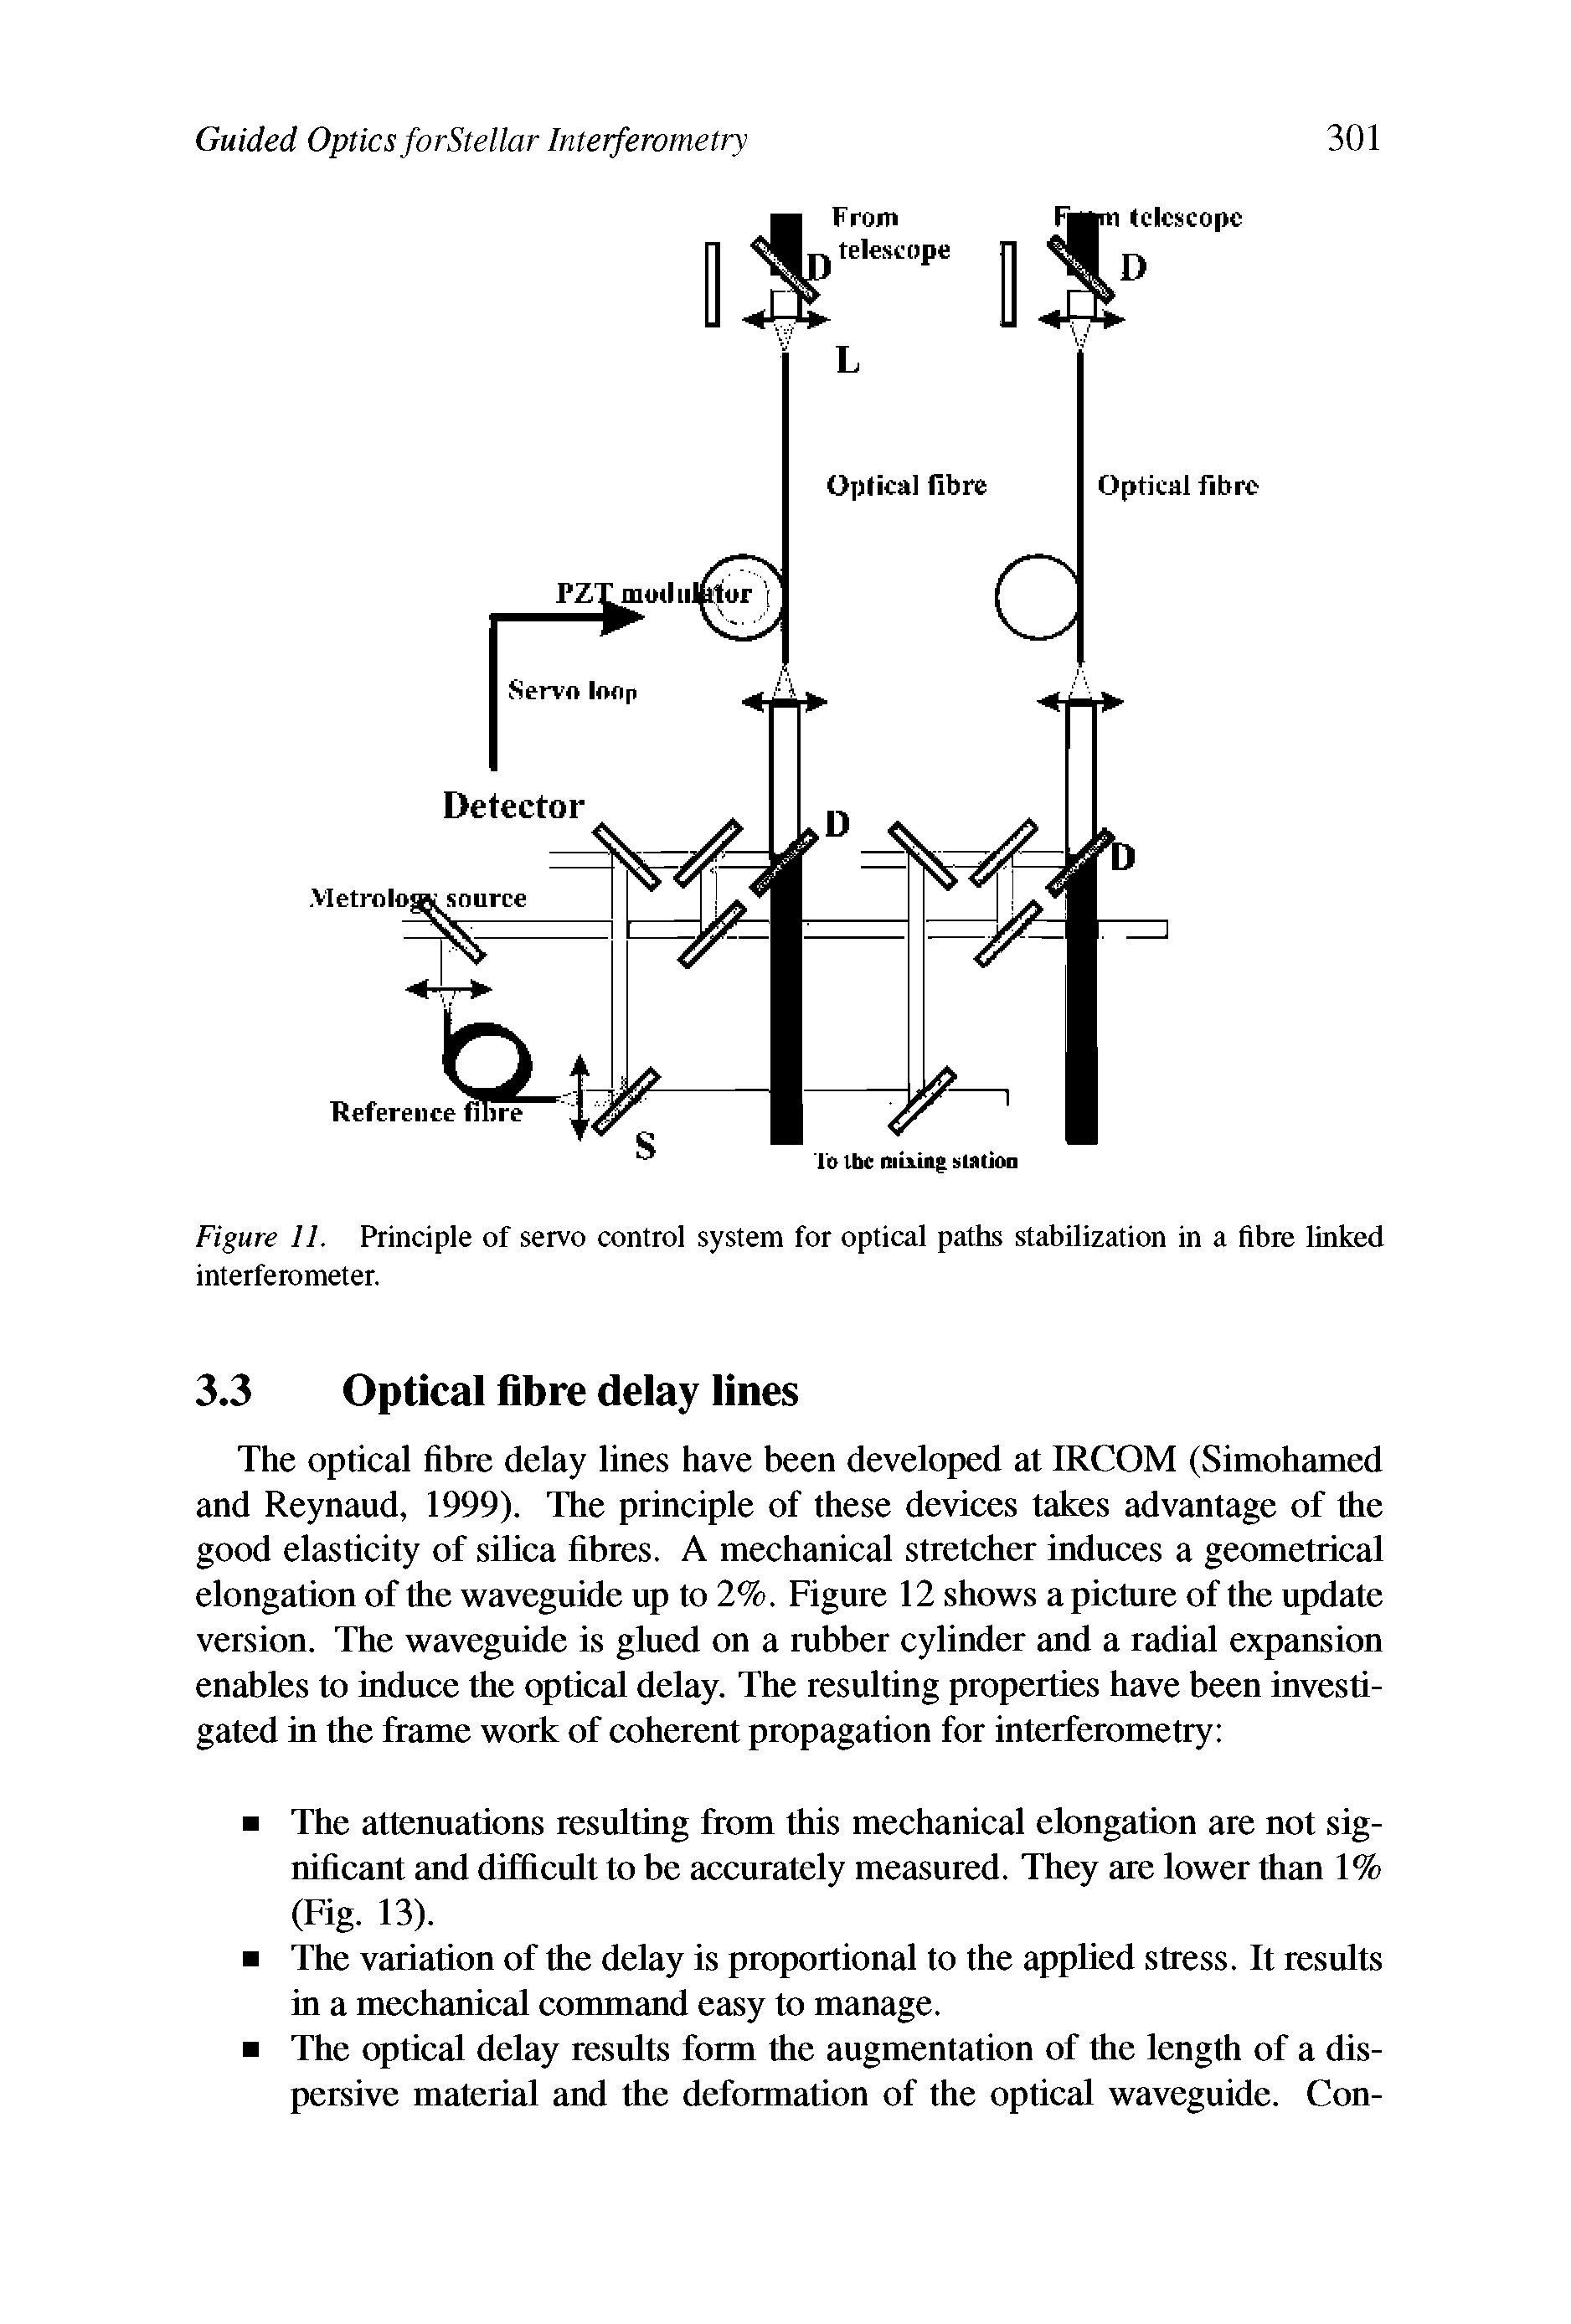 Figure 11. Principle of servo control system for optical paths stabilization in a fibre linked interferometer.